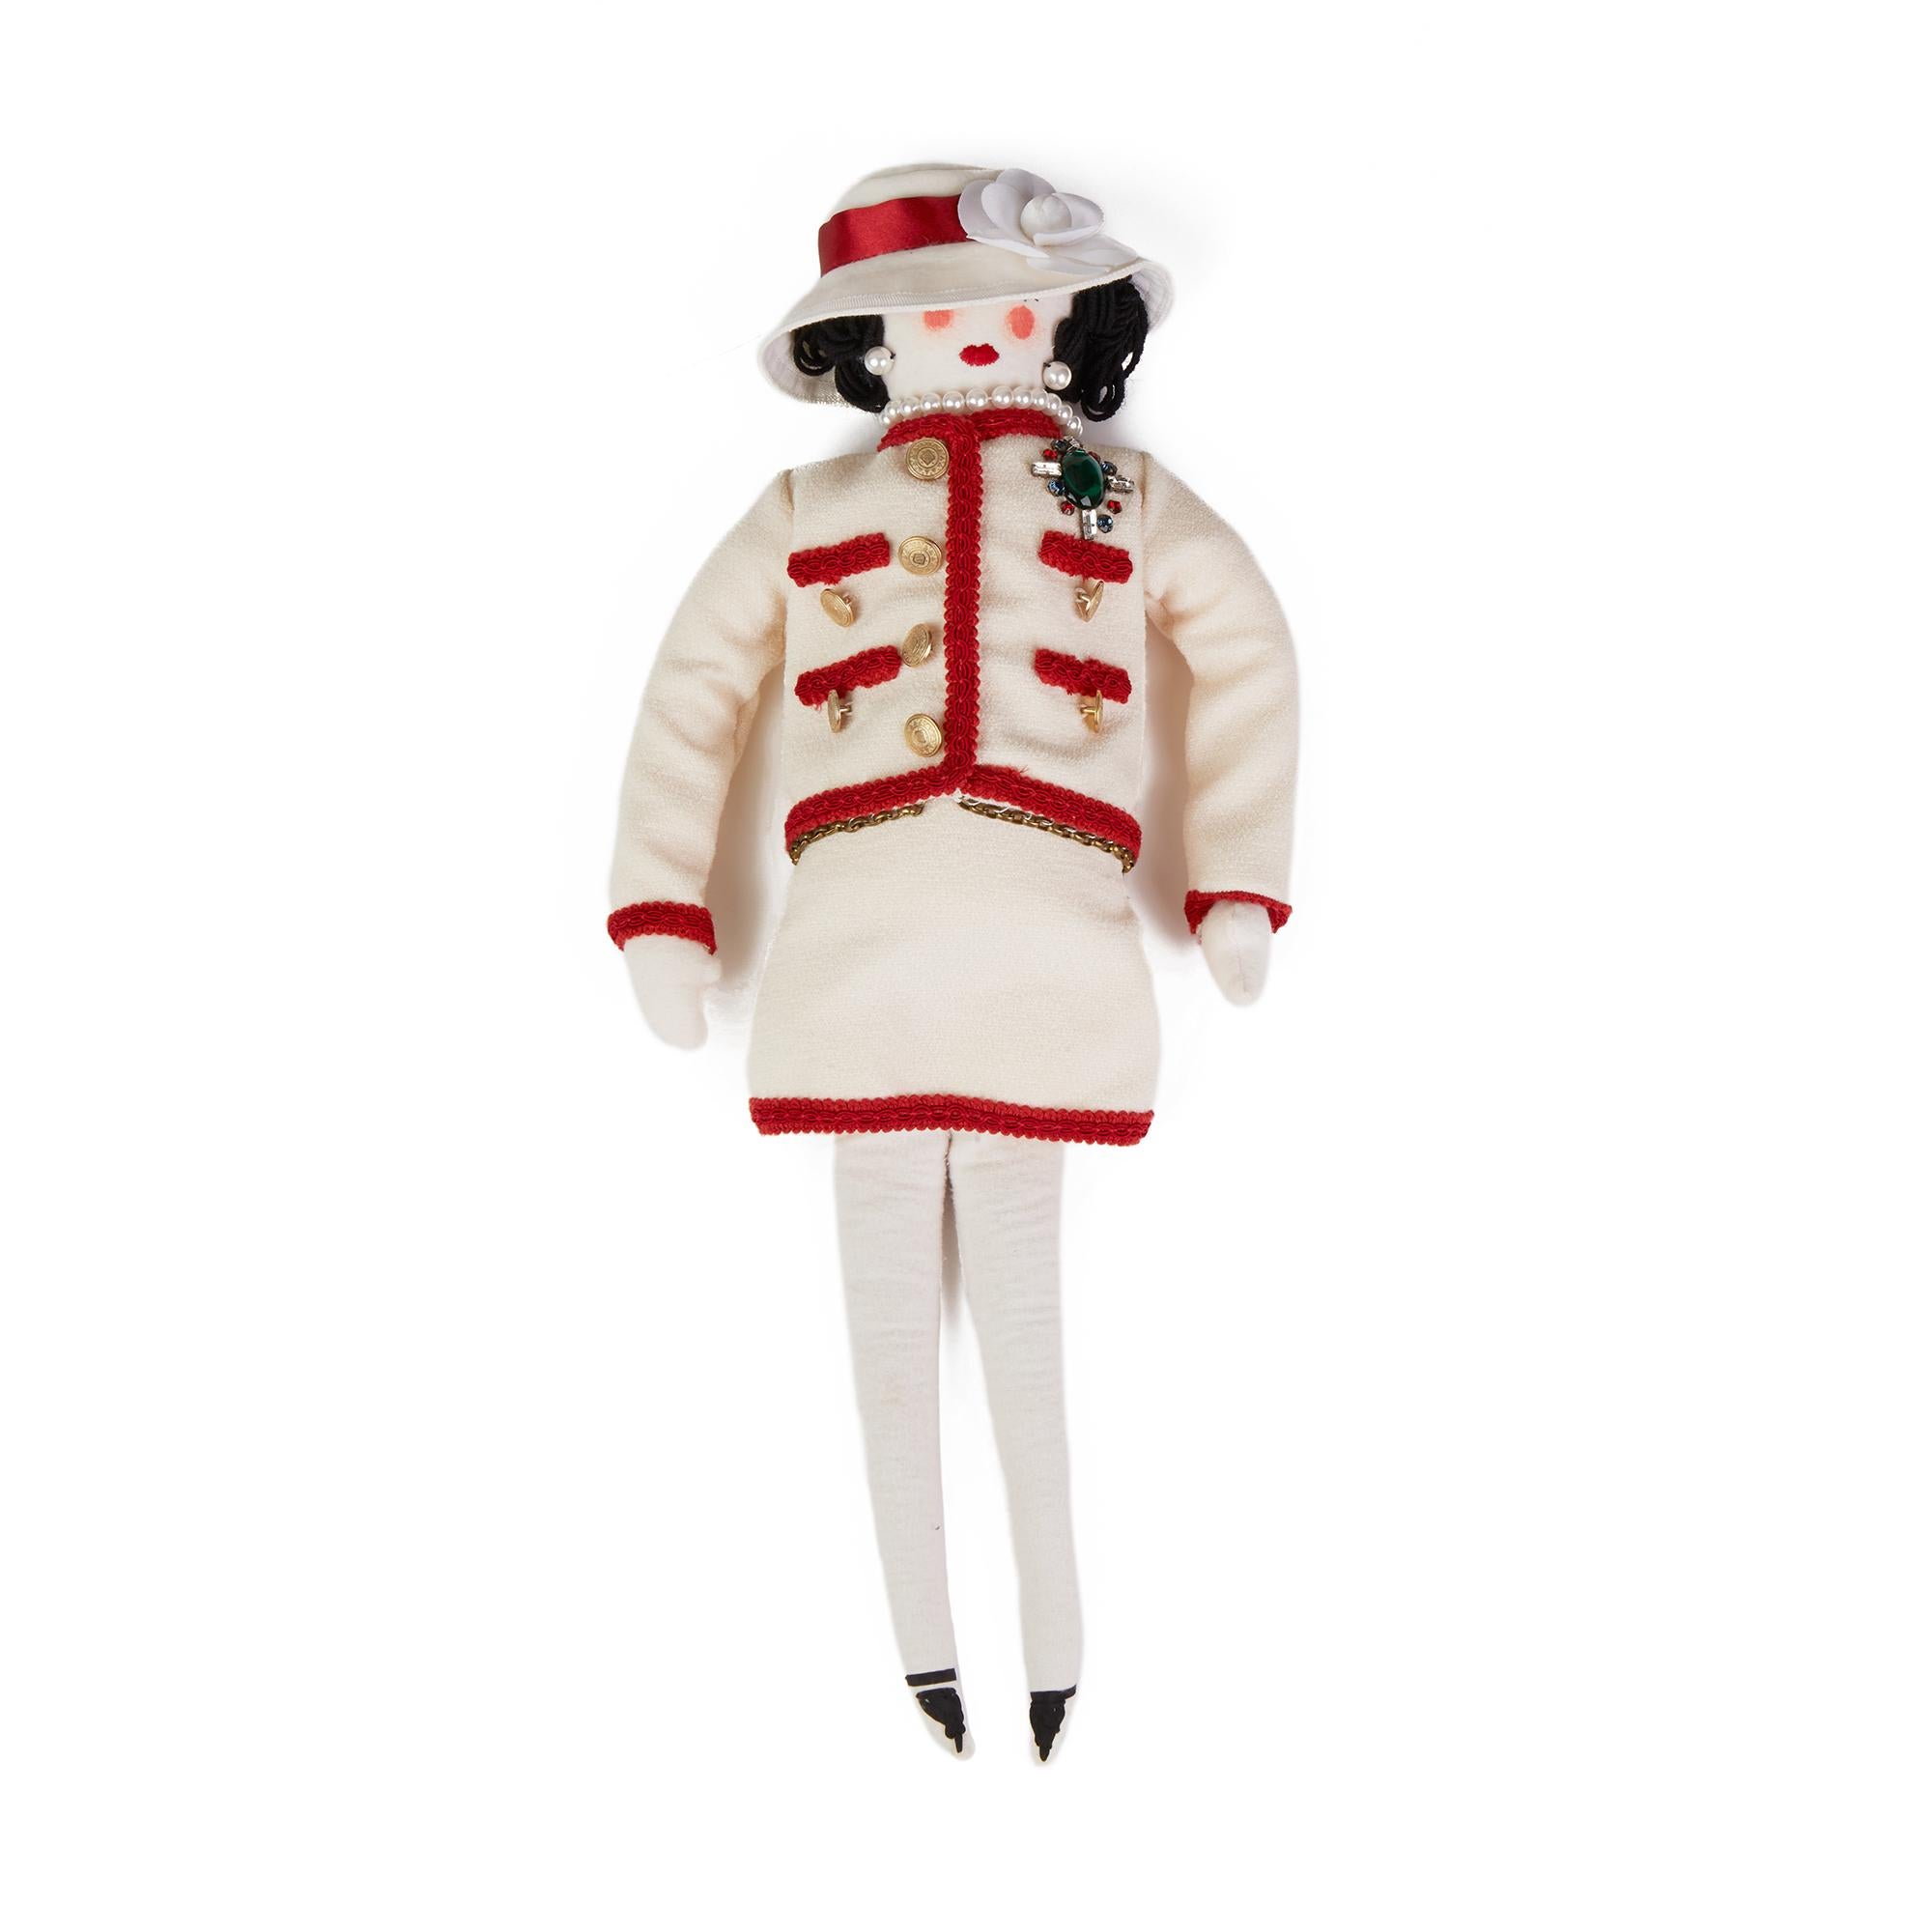 CHANEL
Fabric Coco Madamoiselle Doll by Karl Largerfeld

Xupes Reference: CB215
Serial Number: X
Age (Circa): 2010
Accompanied By: Chanel Box 
Gender: Ladies
Type: Accesory

Colour: Multicolour
Hardware: Gold
Material(s): Fabric

Height: 55cm
Width: